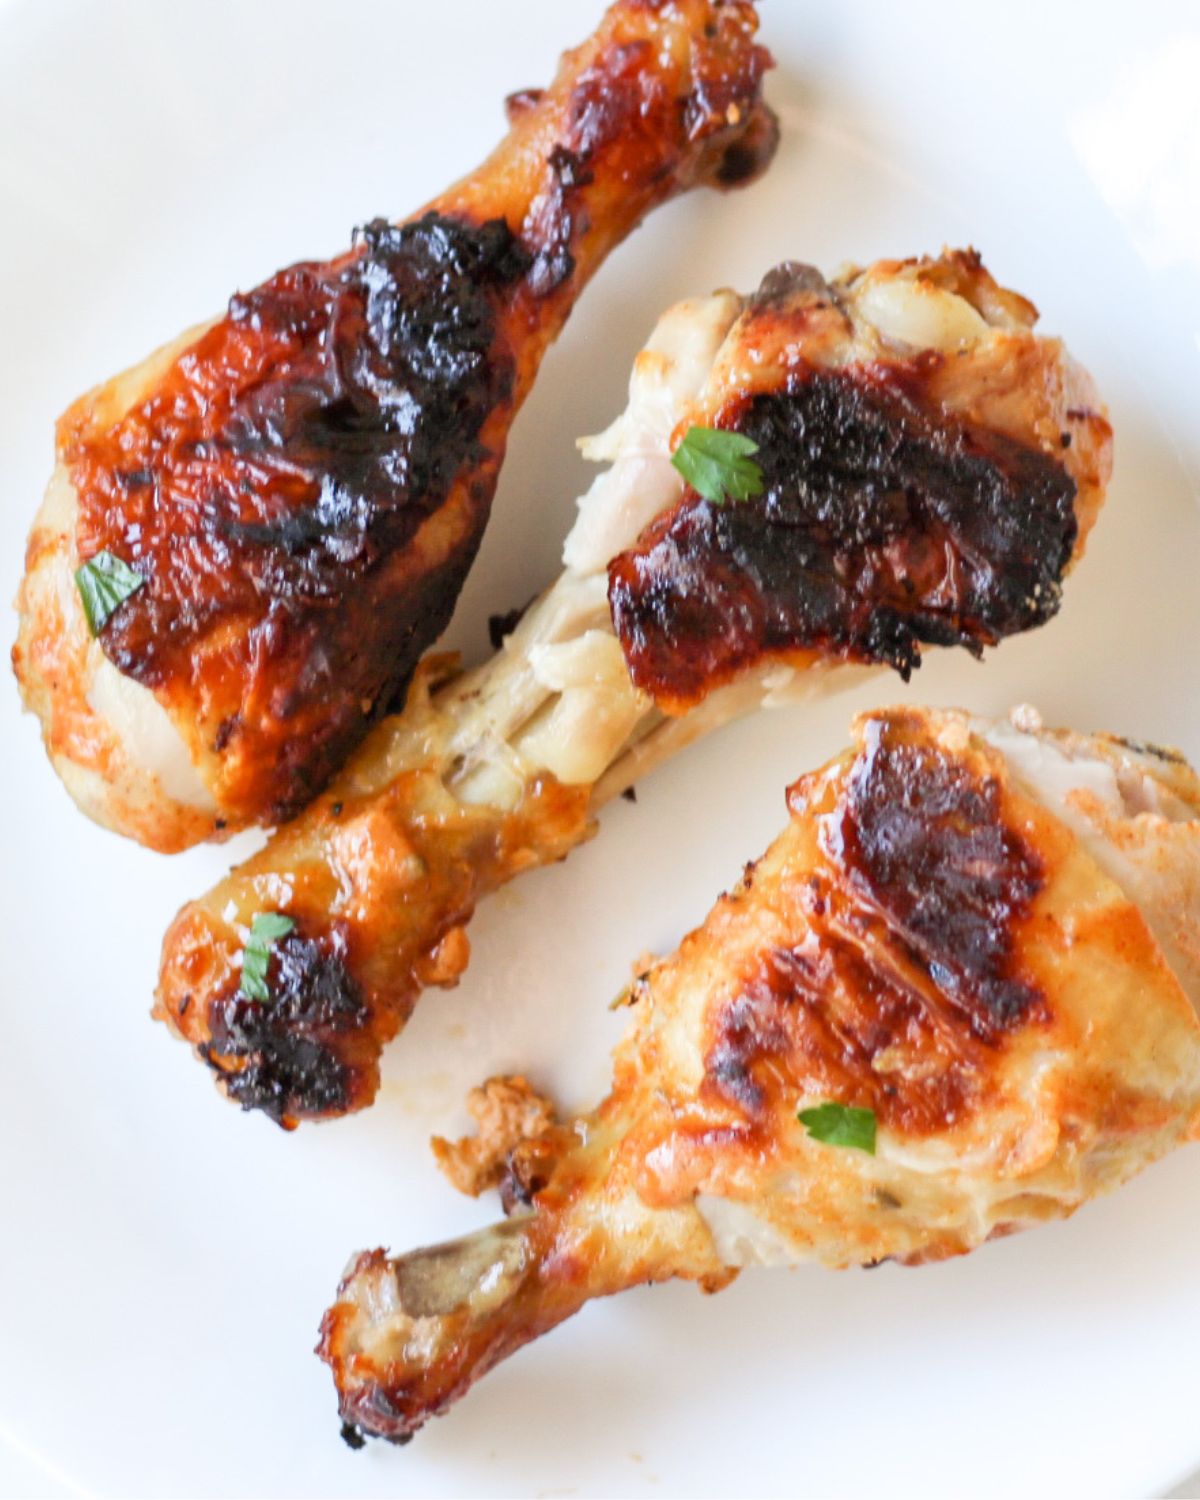 Three cooked chicken drumsticks on a white plate topped with small pieces of green parsley..